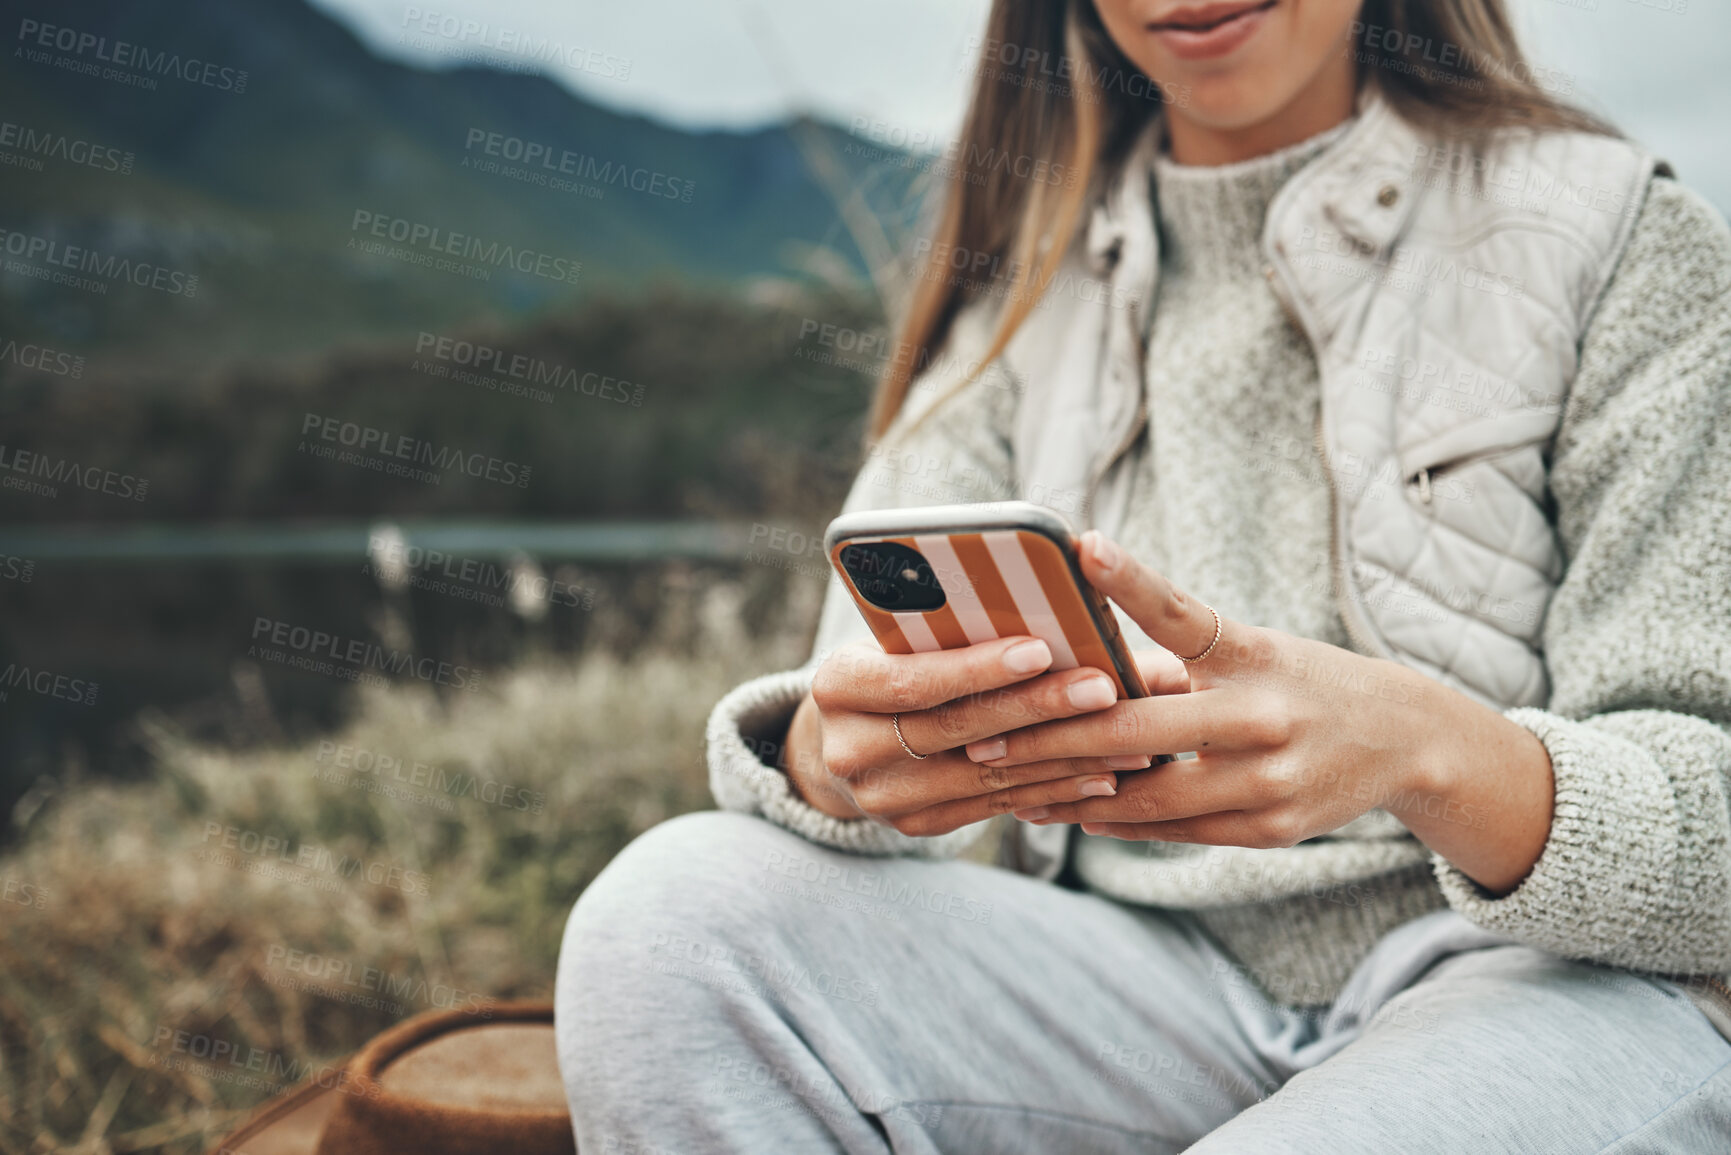 Buy stock photo Mountain, hands and closeup of woman on a phone networking on social media, mobile app or the internet. Technology, nature and female person typing a text message on cellphone in the countryside.